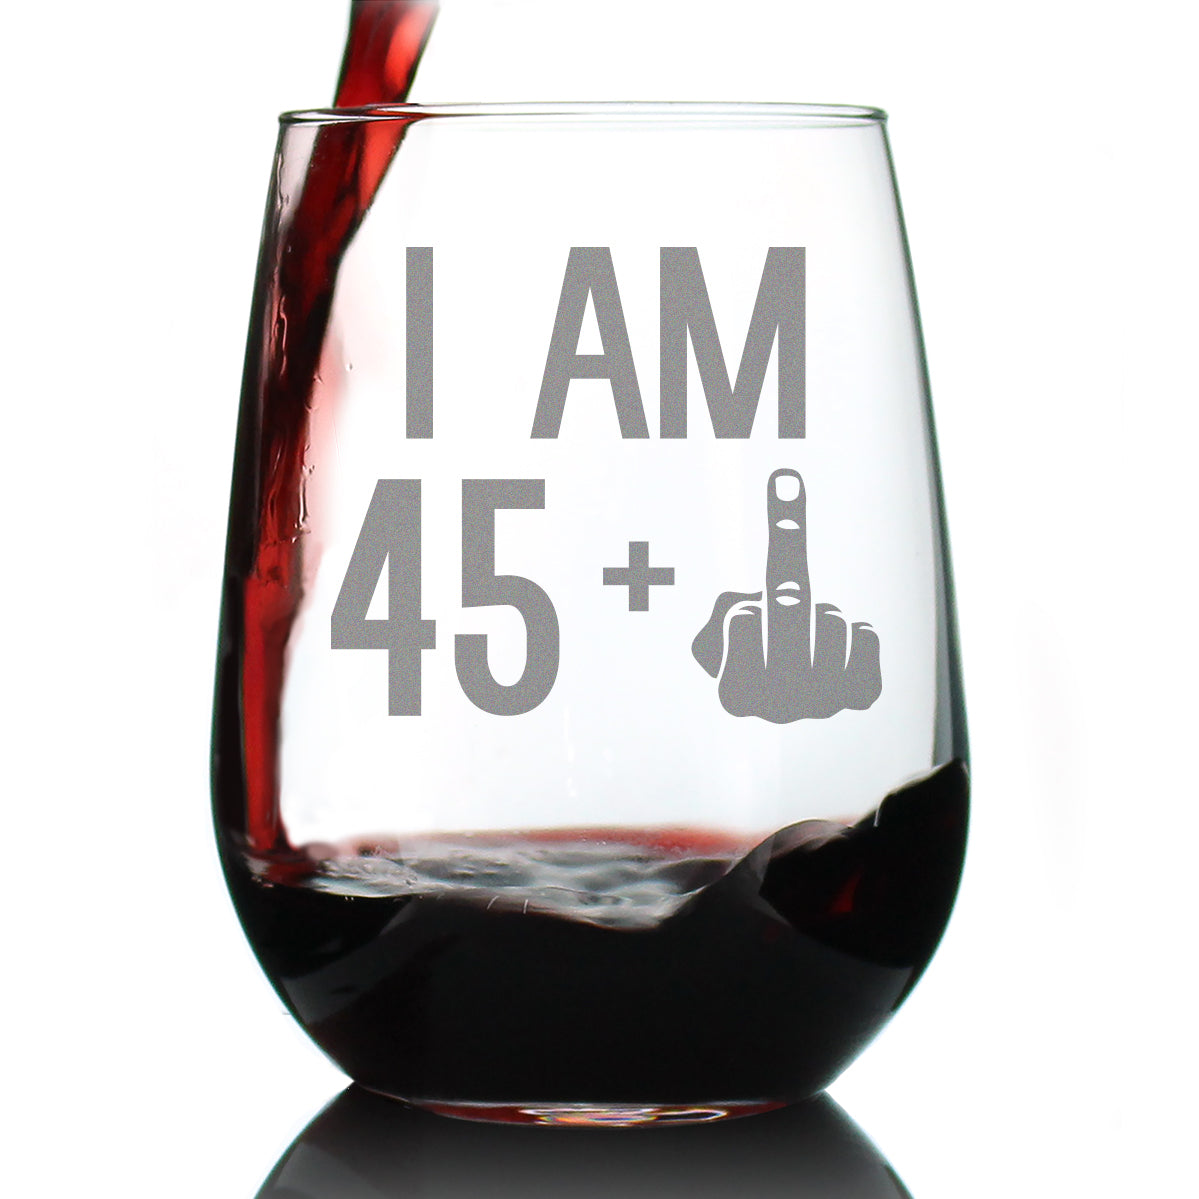 45 + 1 Middle Finger - 46th Birthday Stemless Wine Glass for Women &amp; Men - Cute Funny Wine Gift Idea - Unique Personalized Bday Glasses for Mom, Dad, Friend Turning 46 - Drinking Party Decoration